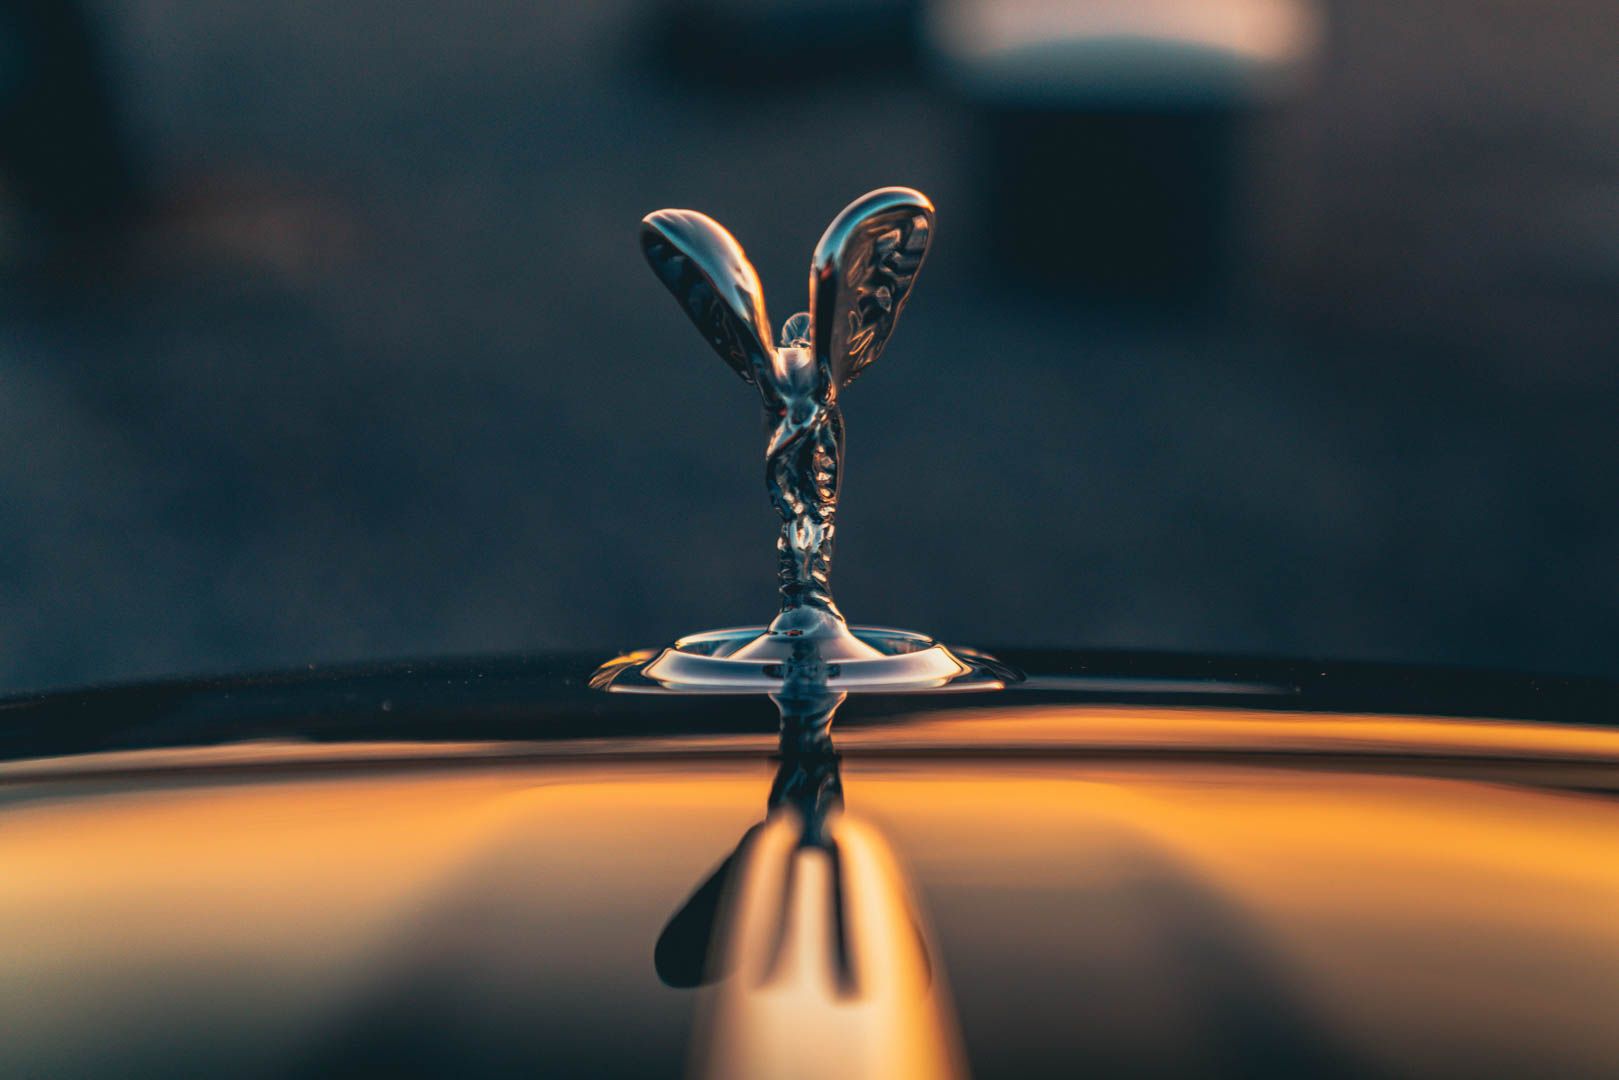 The Rear View Of Rolls-Royce's Spirit Of Ecstasy